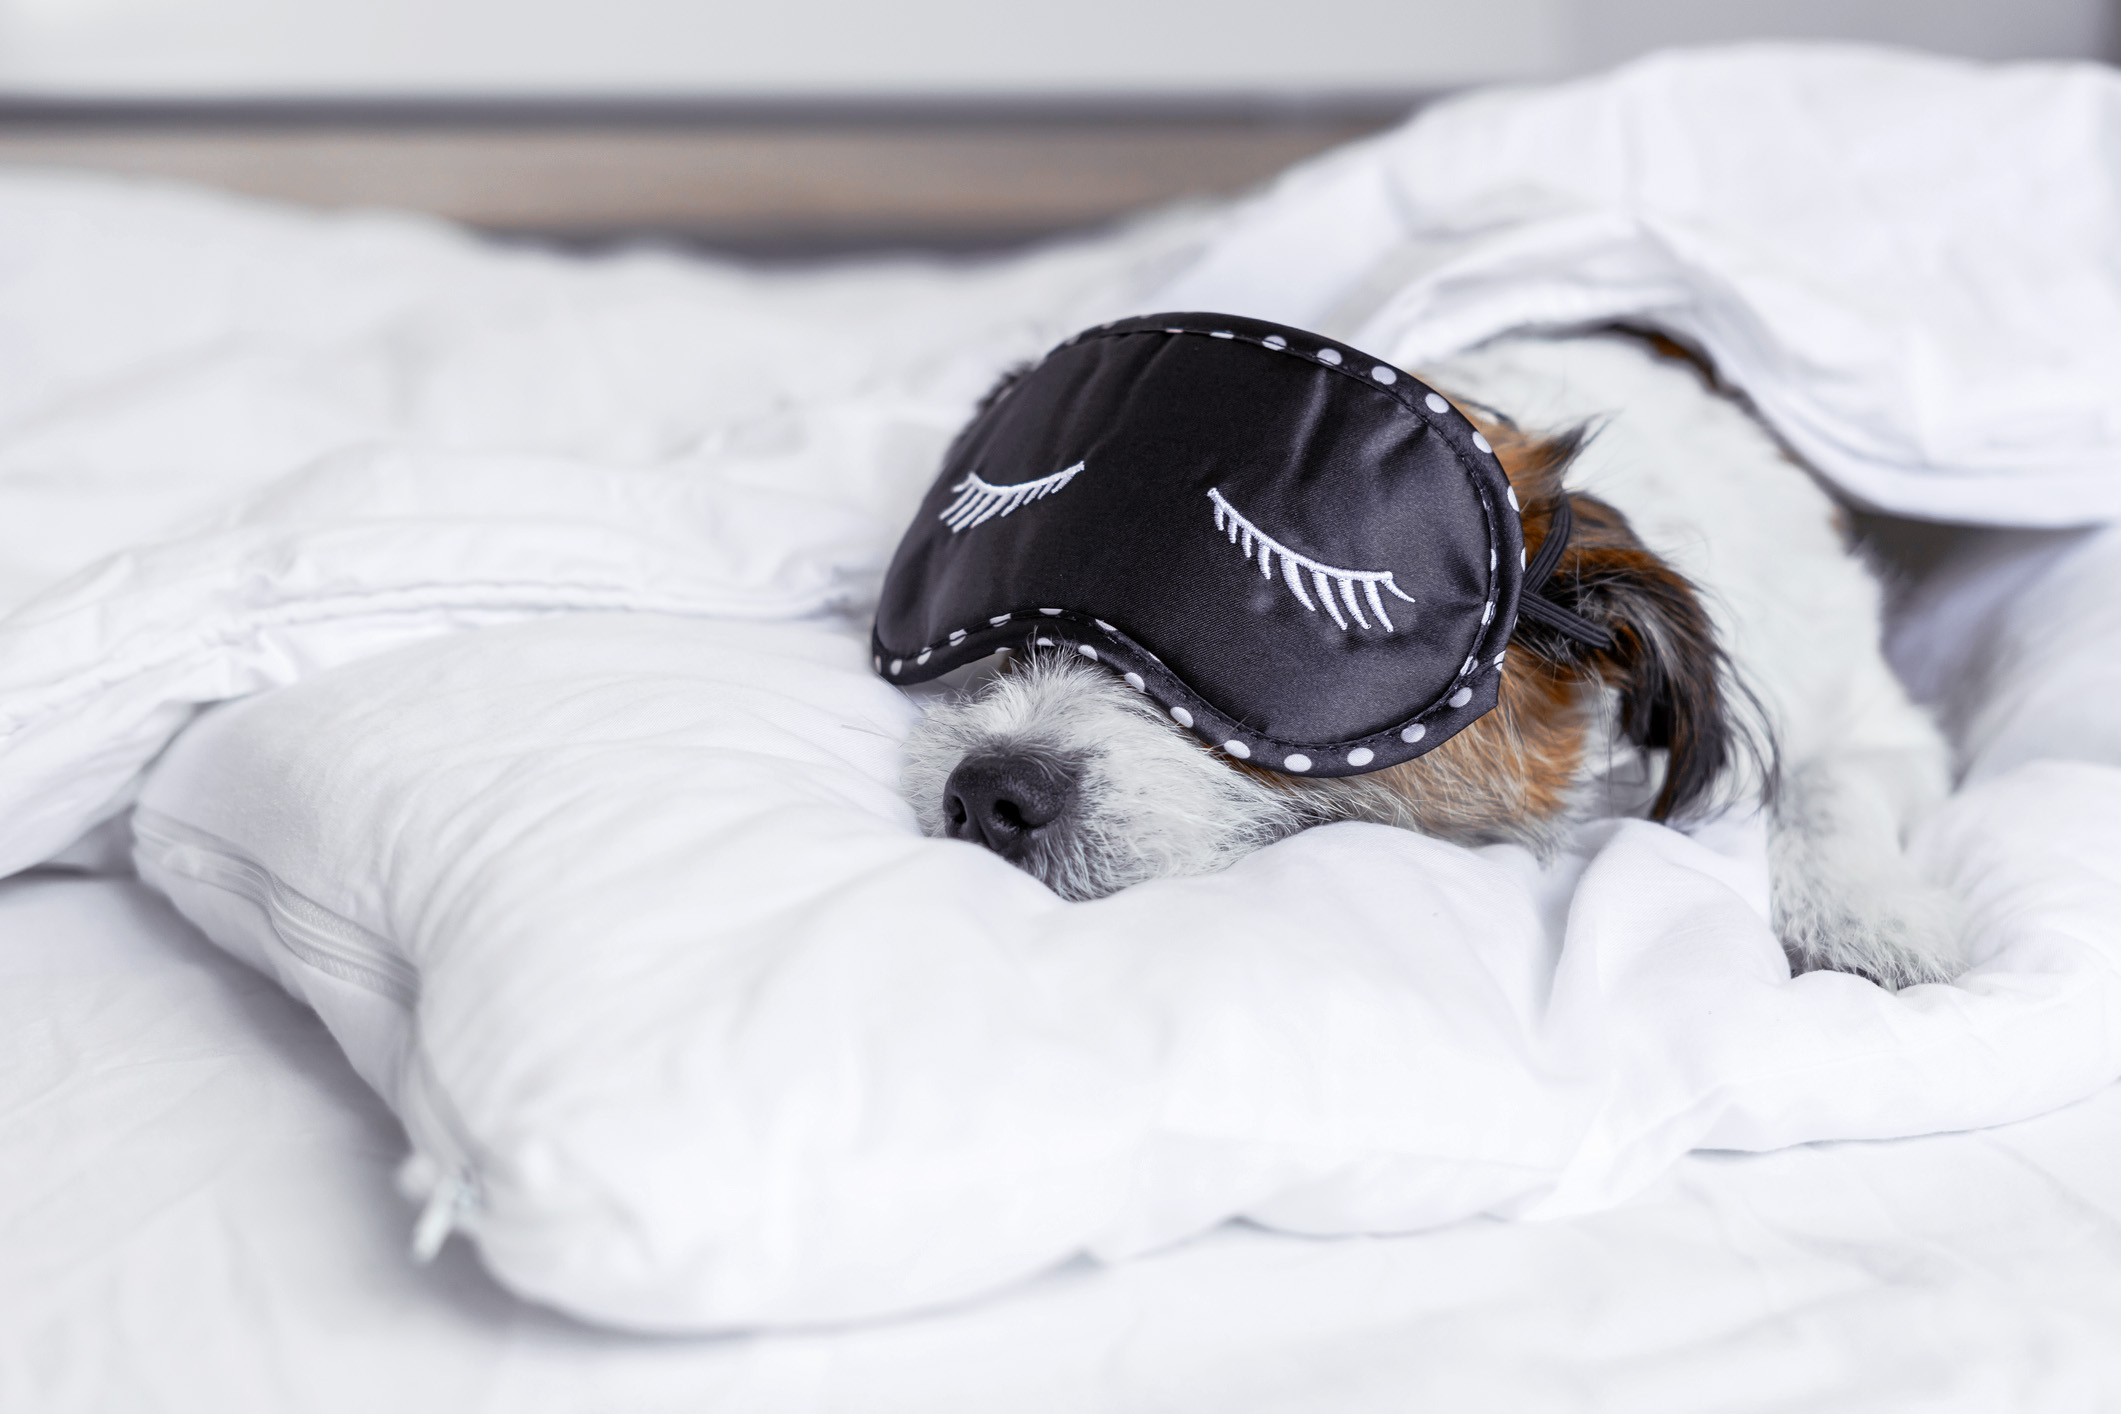 Sleeping with your dog, is it better or worse for a good night's sleep?